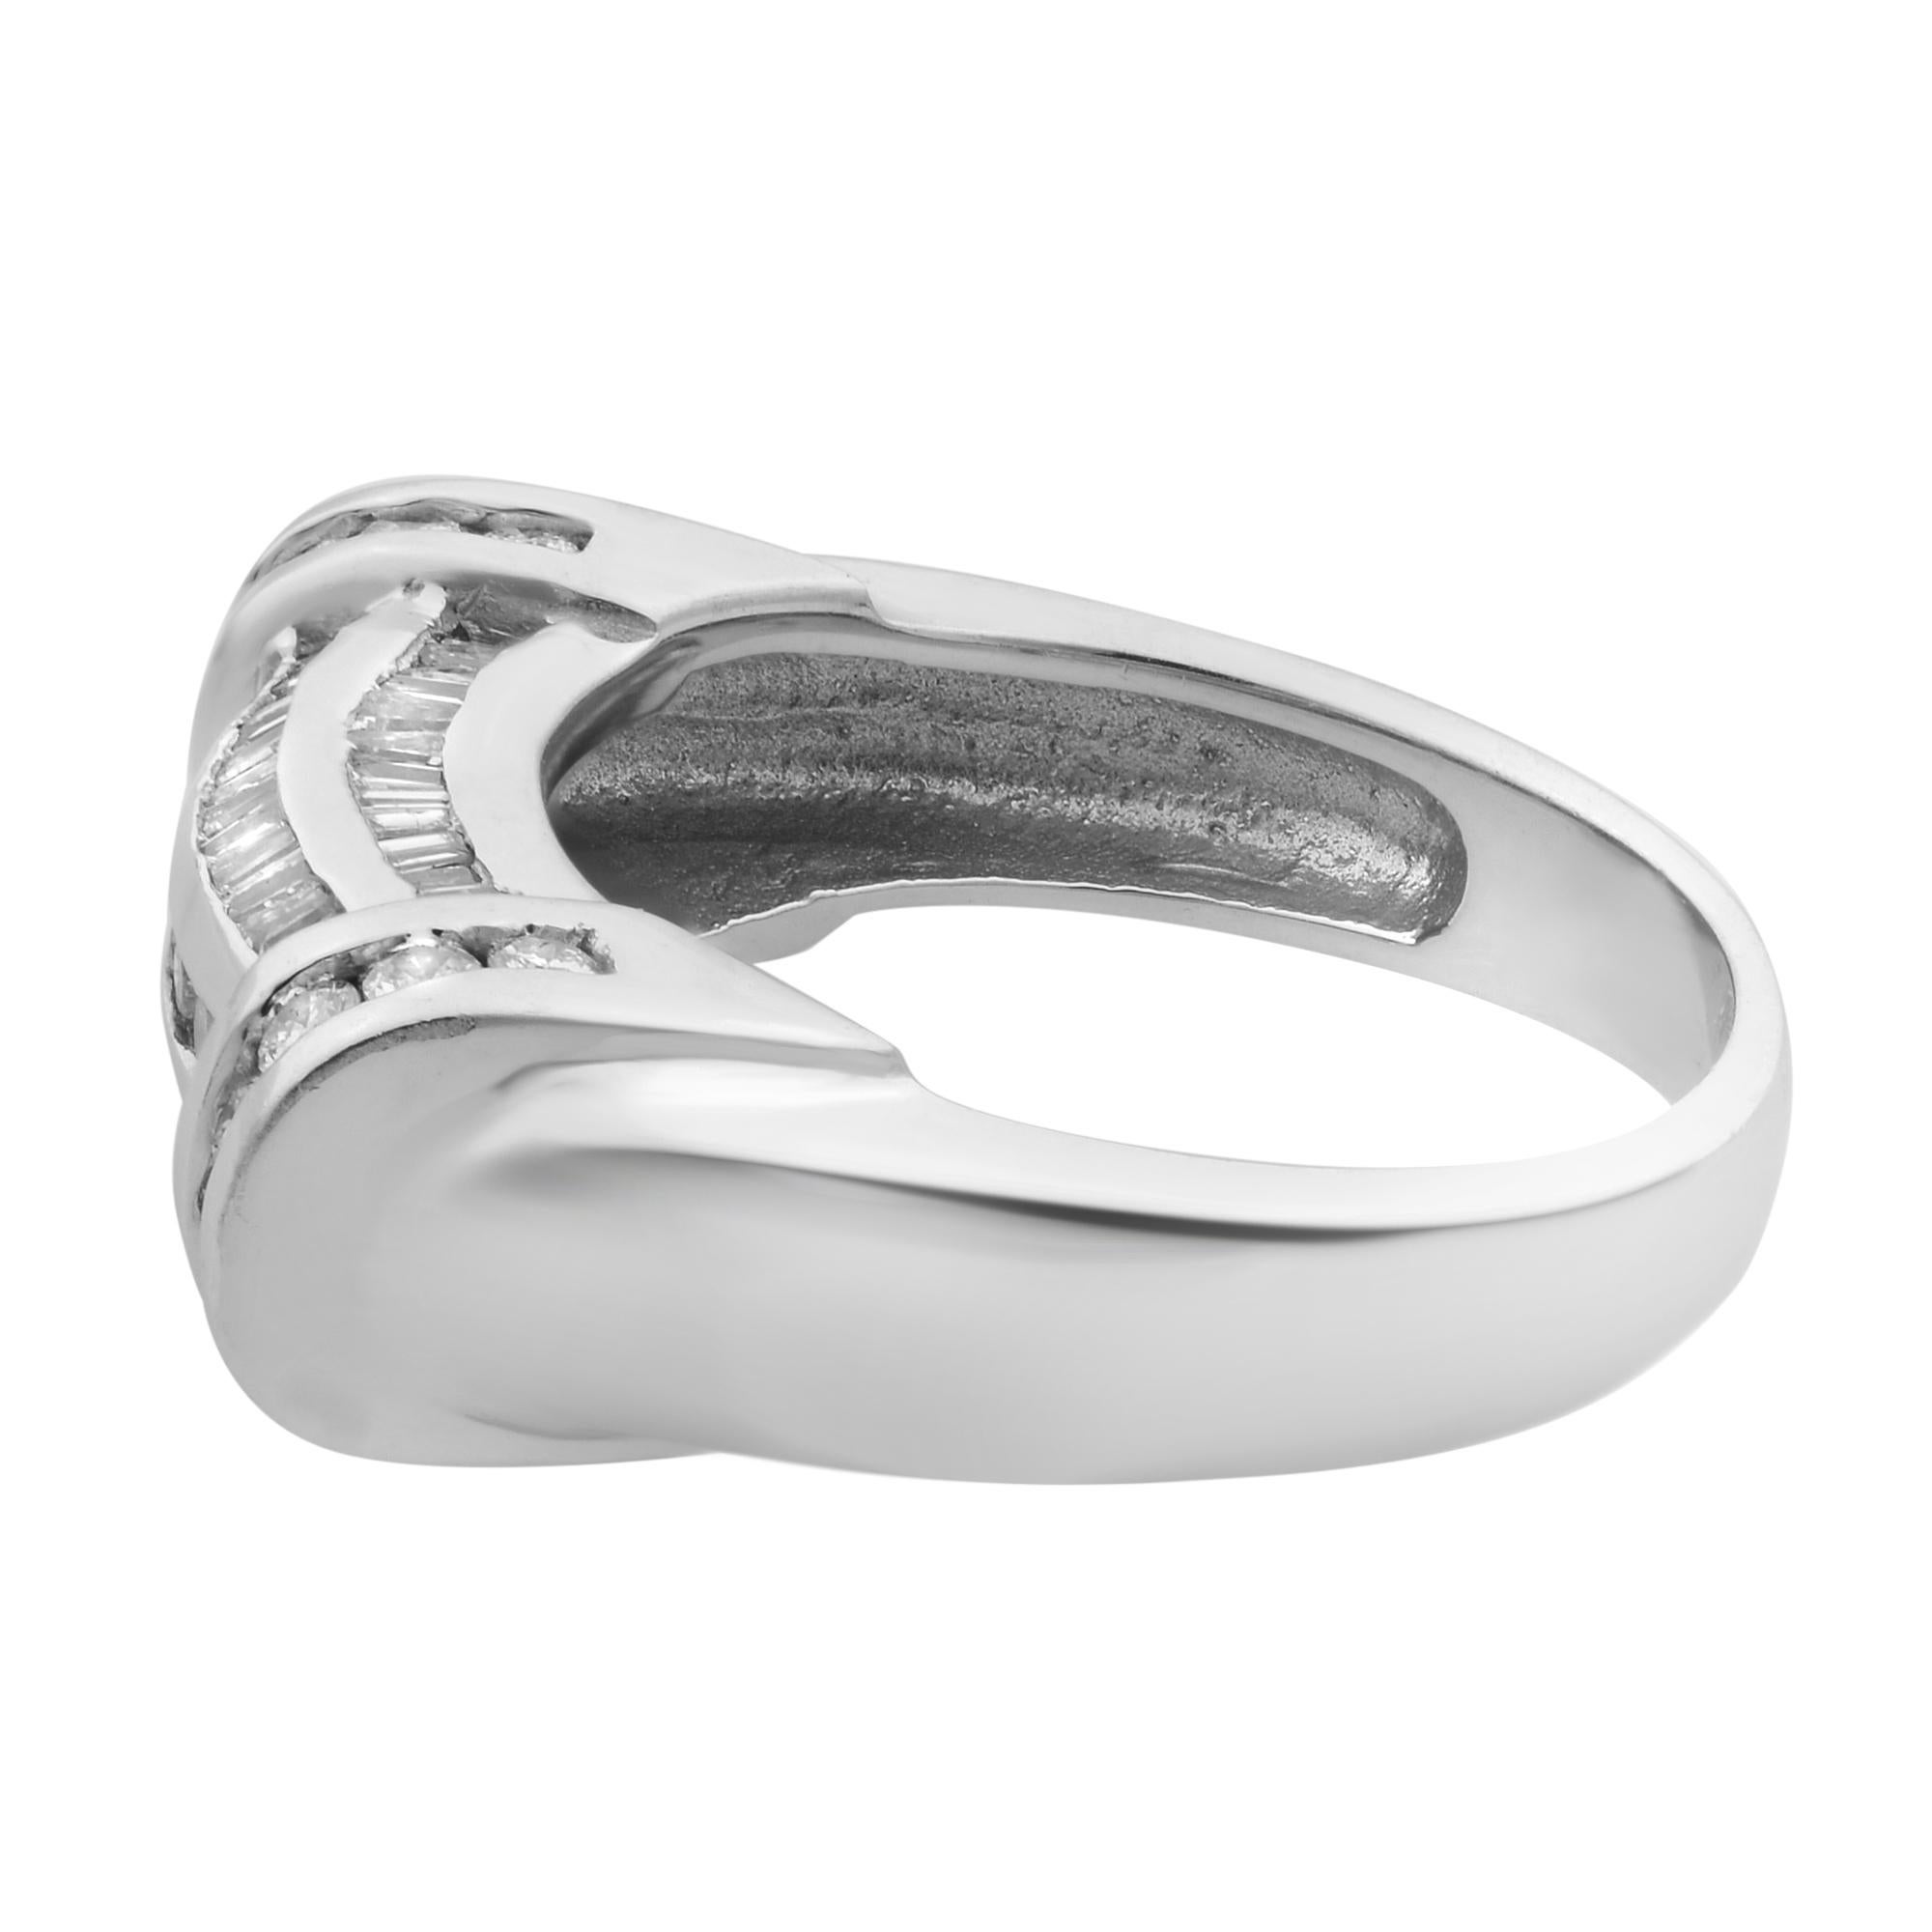 Rachel Koen 1.00Cttw Baguette & Round Cut Diamond Ring 14K White Gold In Excellent Condition For Sale In New York, NY